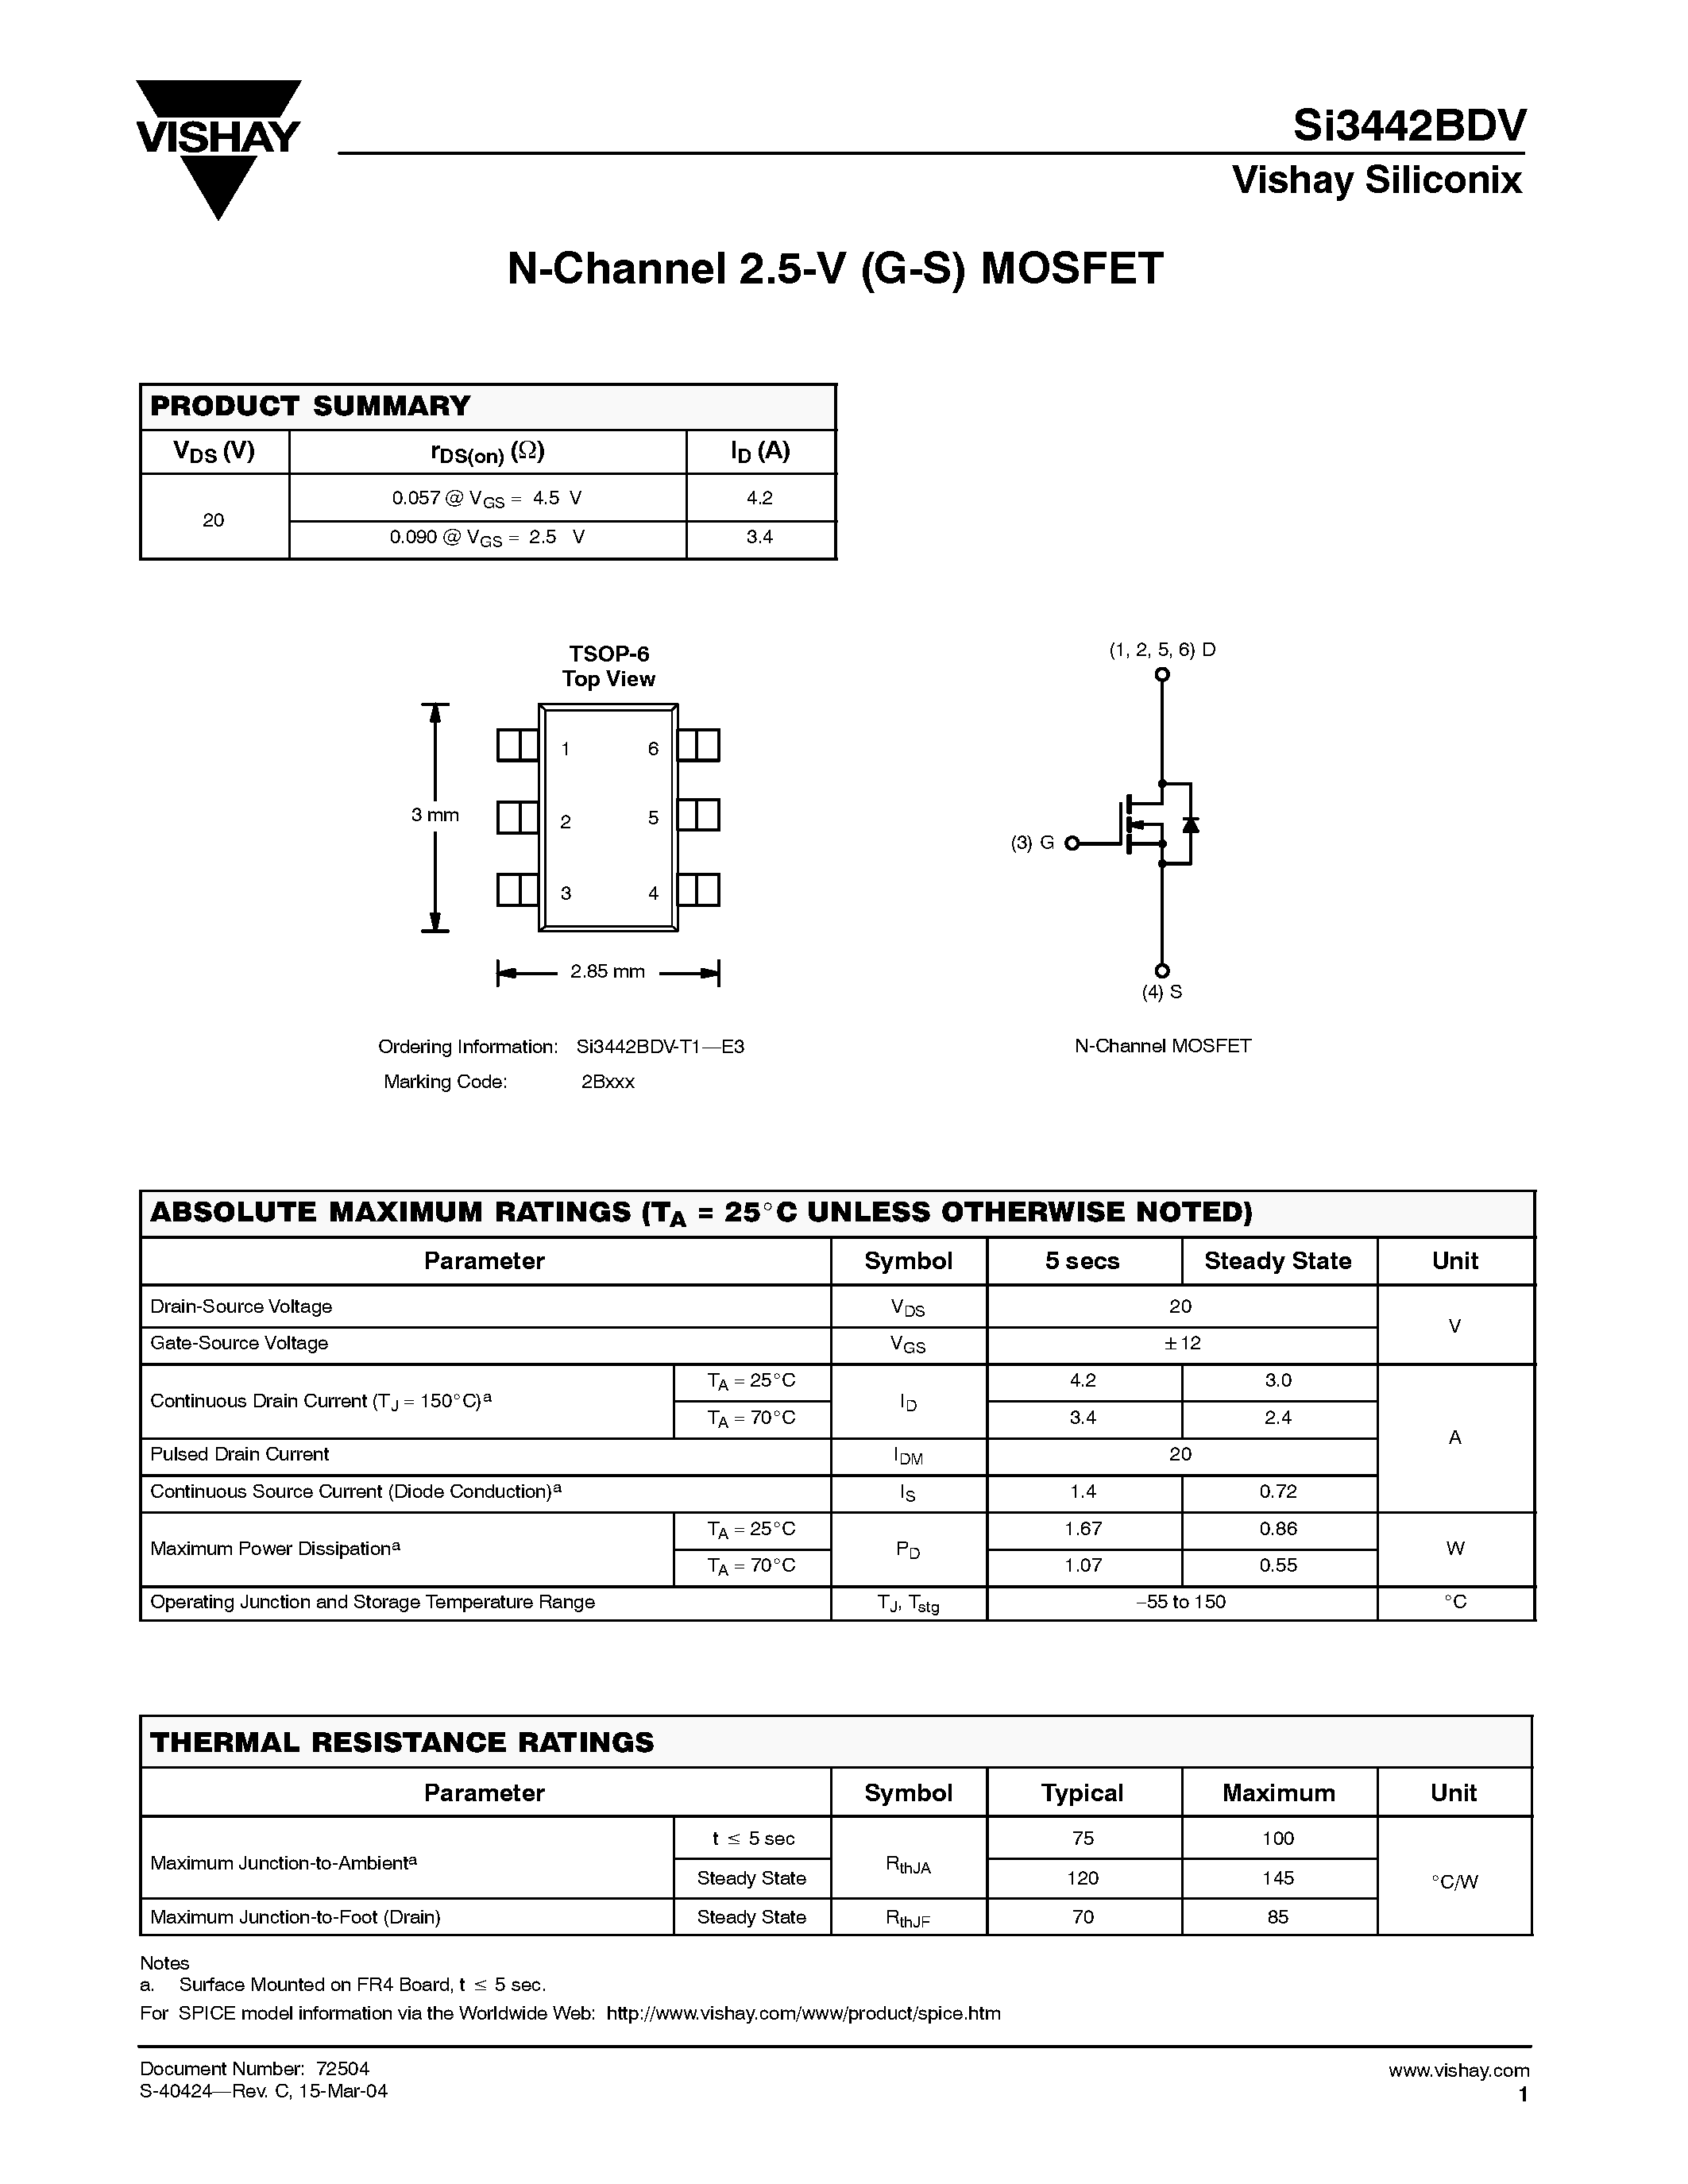 Datasheet SI3442BDV-T1-E3 - N-Channel 2.5-V (G-S) MOSFET page 1